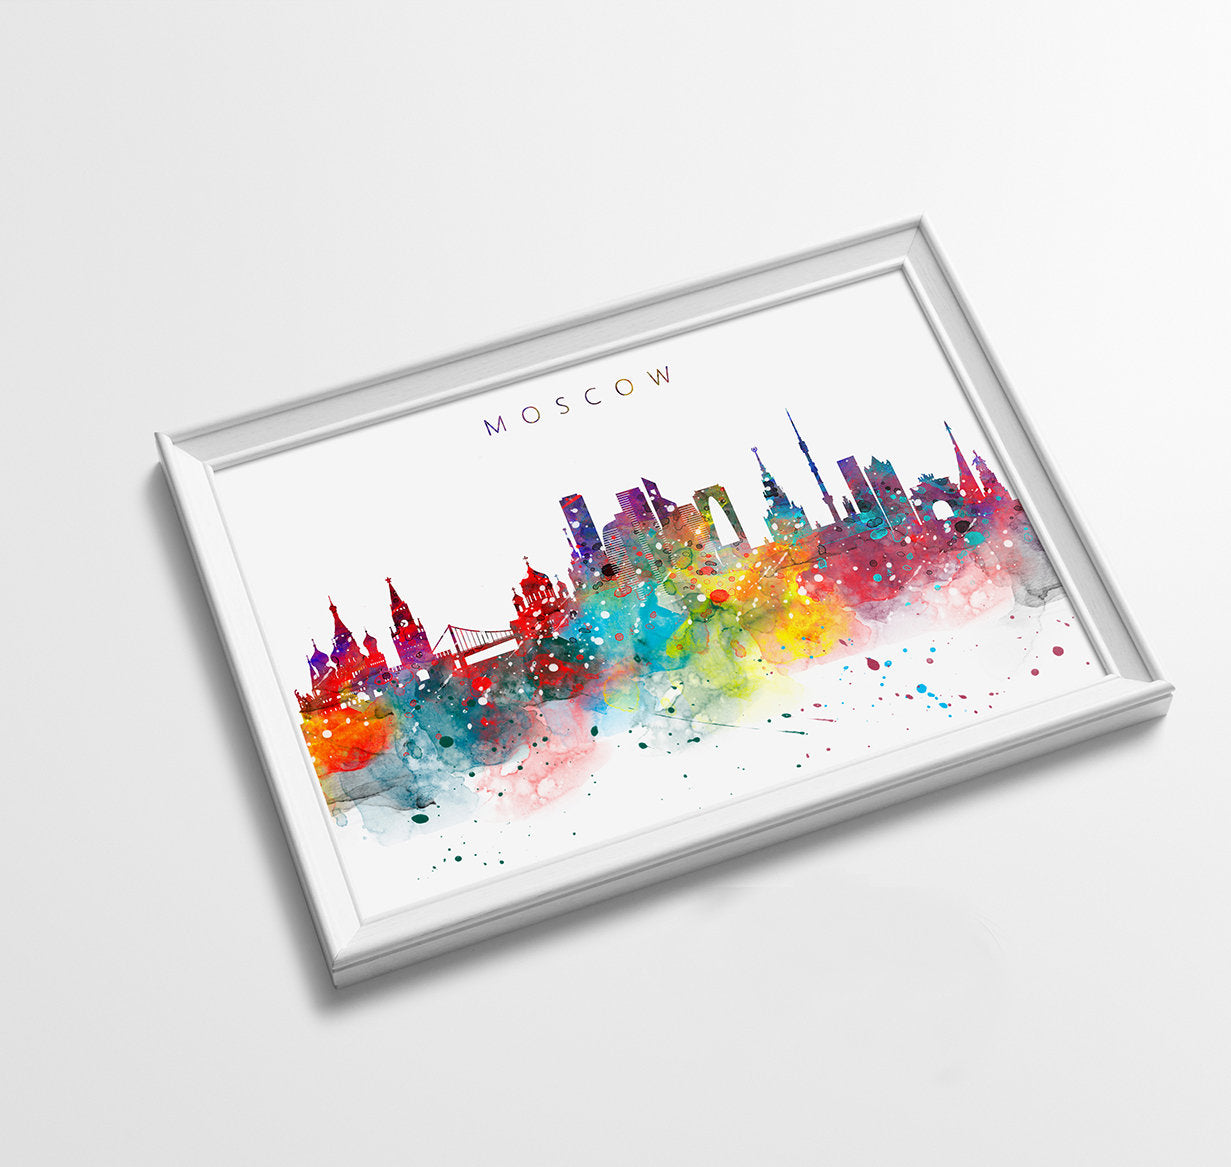 Moscow Skyline Art Print  | Minimalist Watercolor Art Print Poster Gift Idea For Him Or Her | Wall Art | City Skyline | City Prints